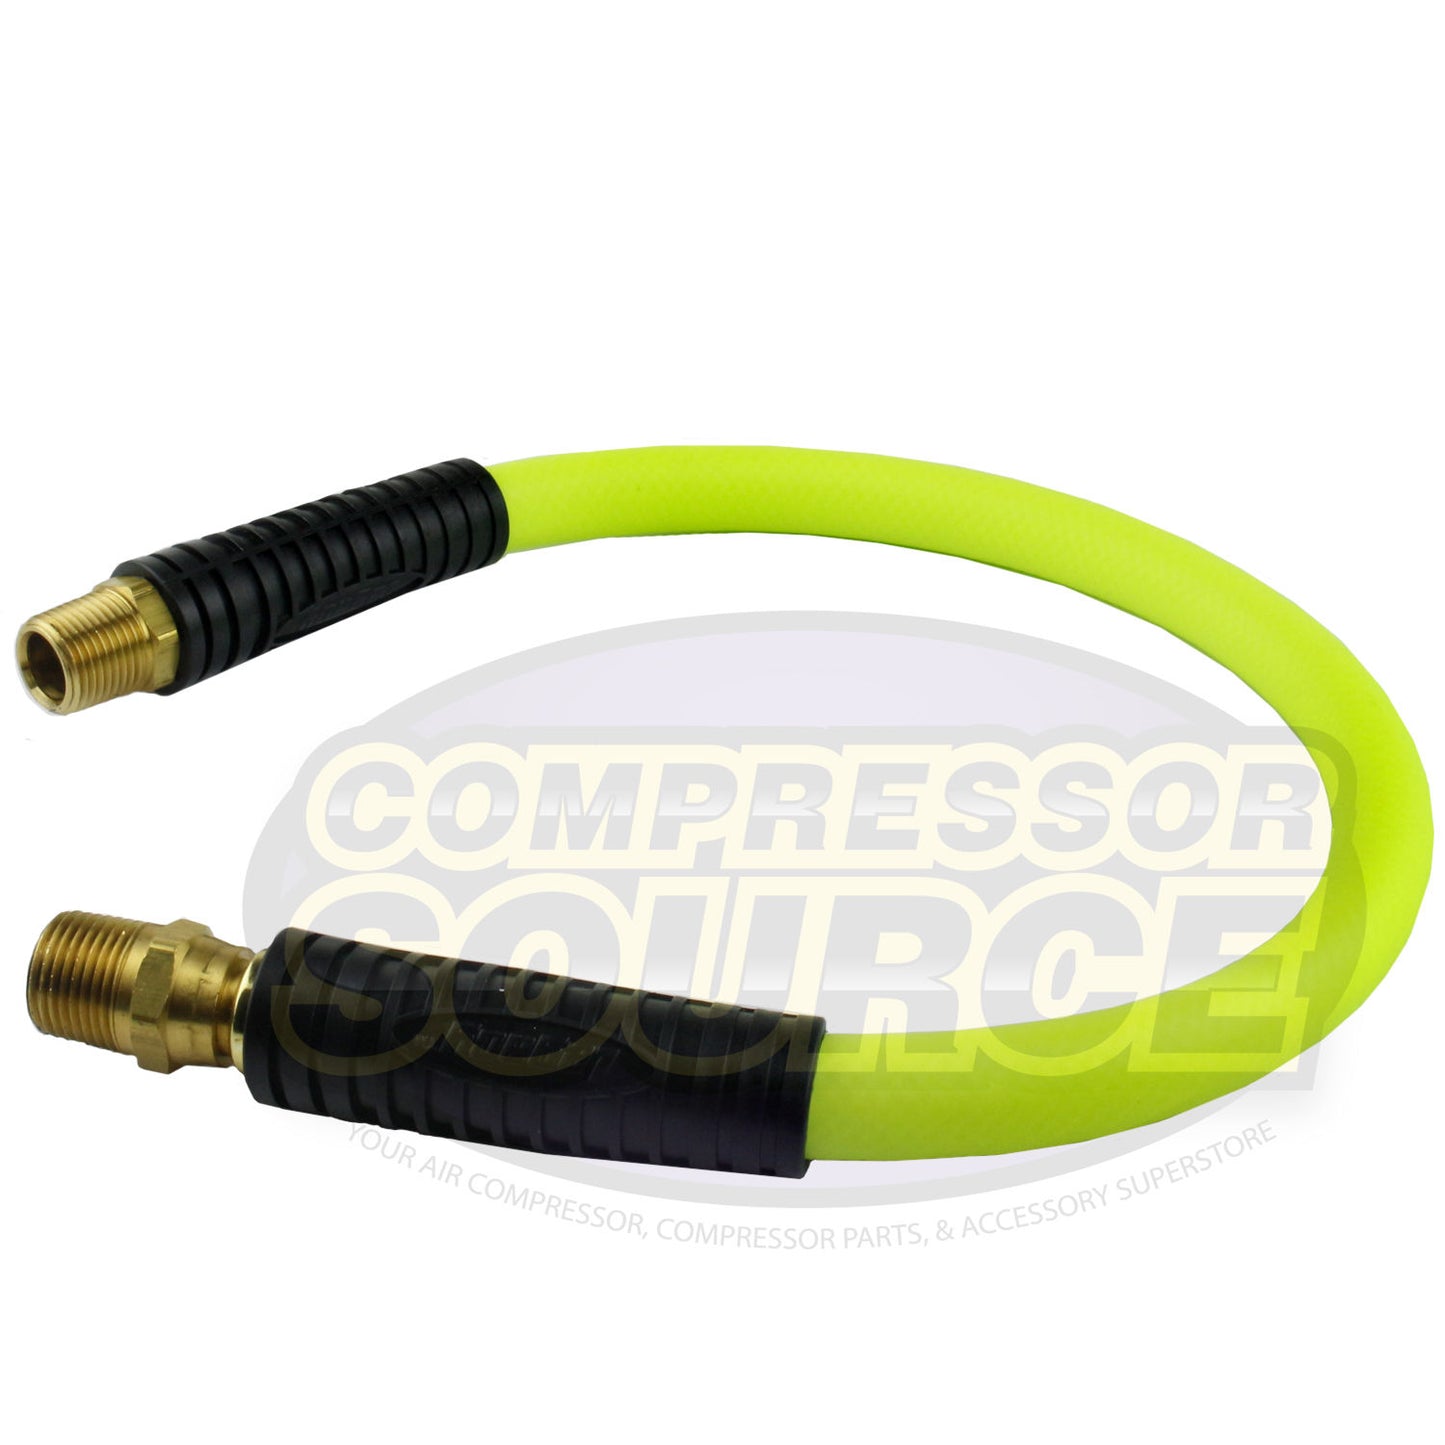 Flexzilla New 1/2 x 2' FT Air Hose Whip With 1/2' MNPT Swivel End